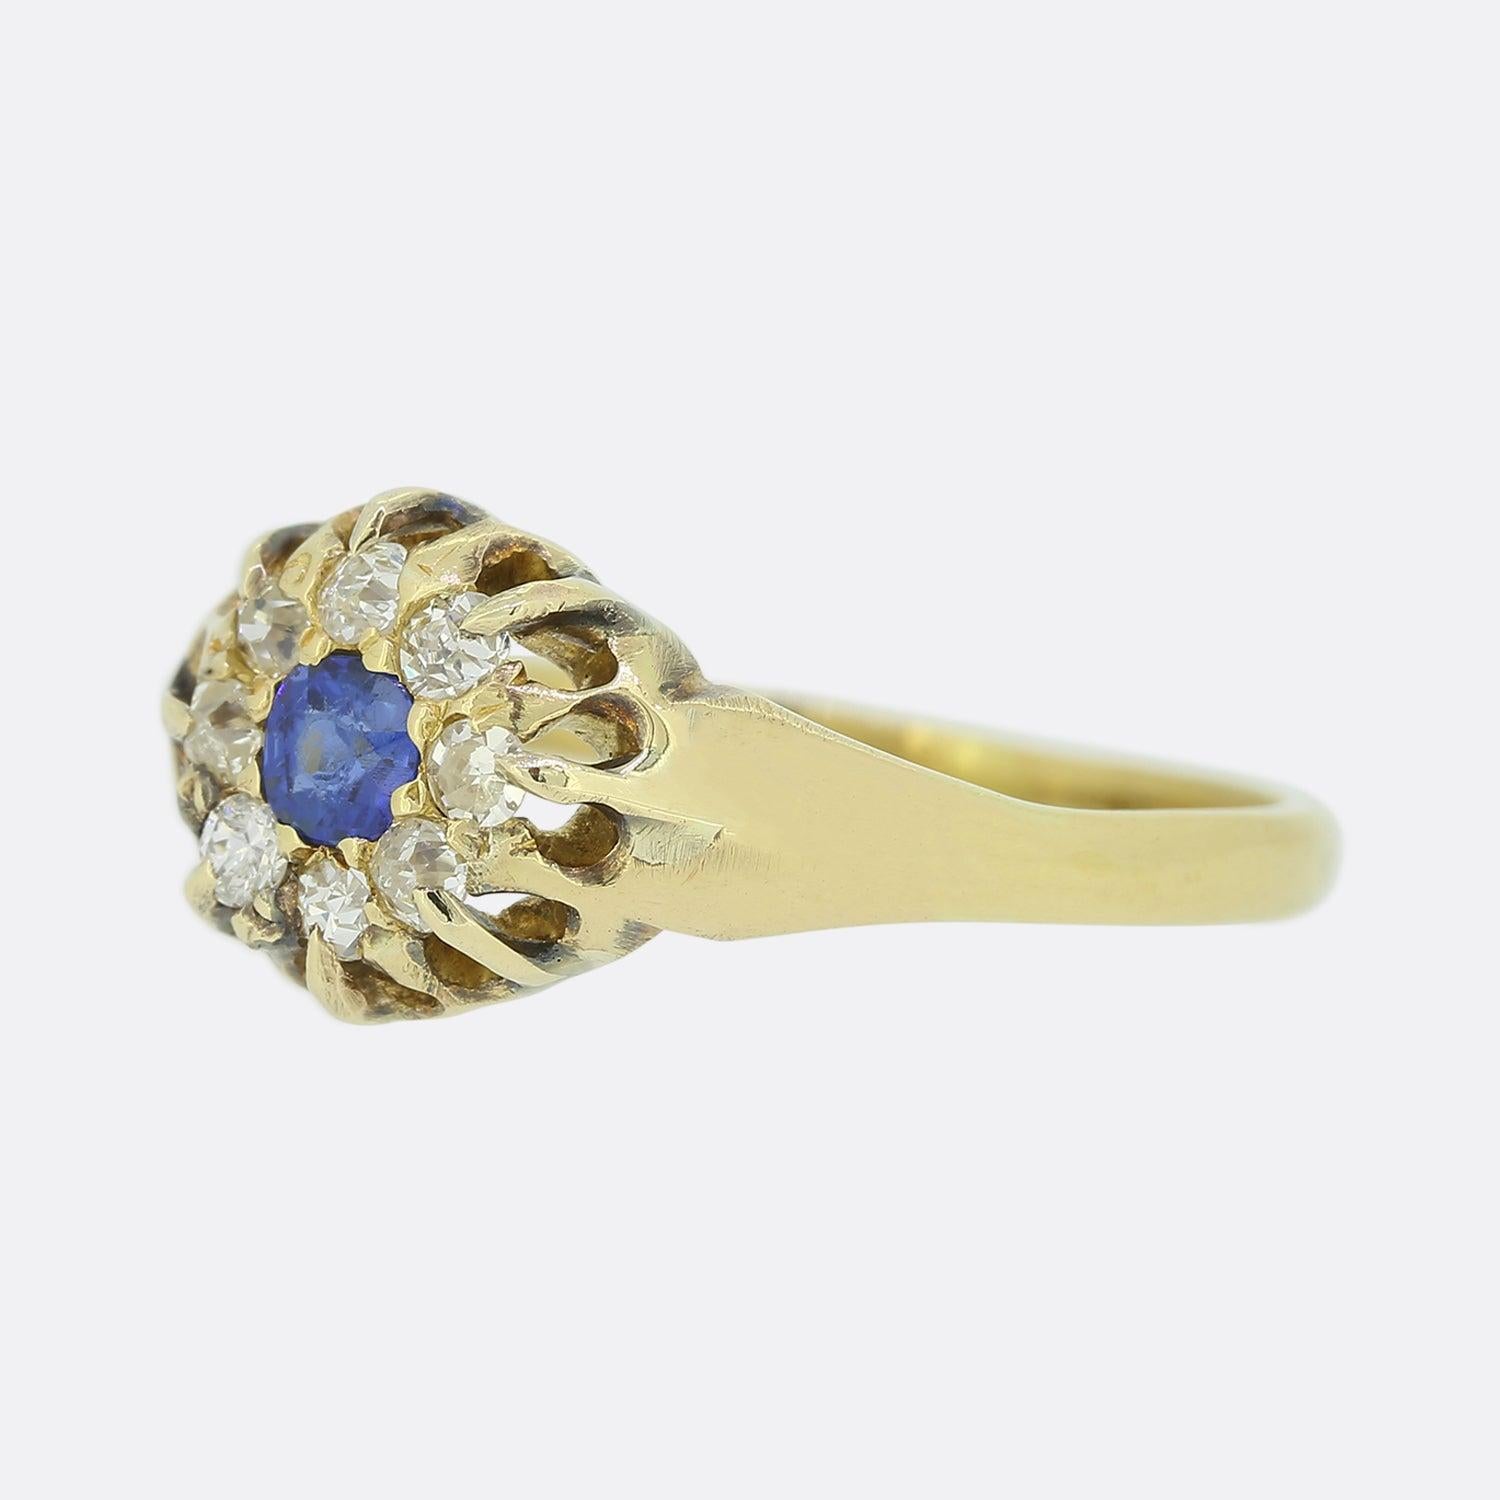 This is a lovely antique Edwardian sapphire and diamond cluster ring. The ring features a centralised sapphire which is surrounded by a cluster of old cut diamonds in a circular shaped setting with an 18ct yellow gold plain band.

Condition: Used